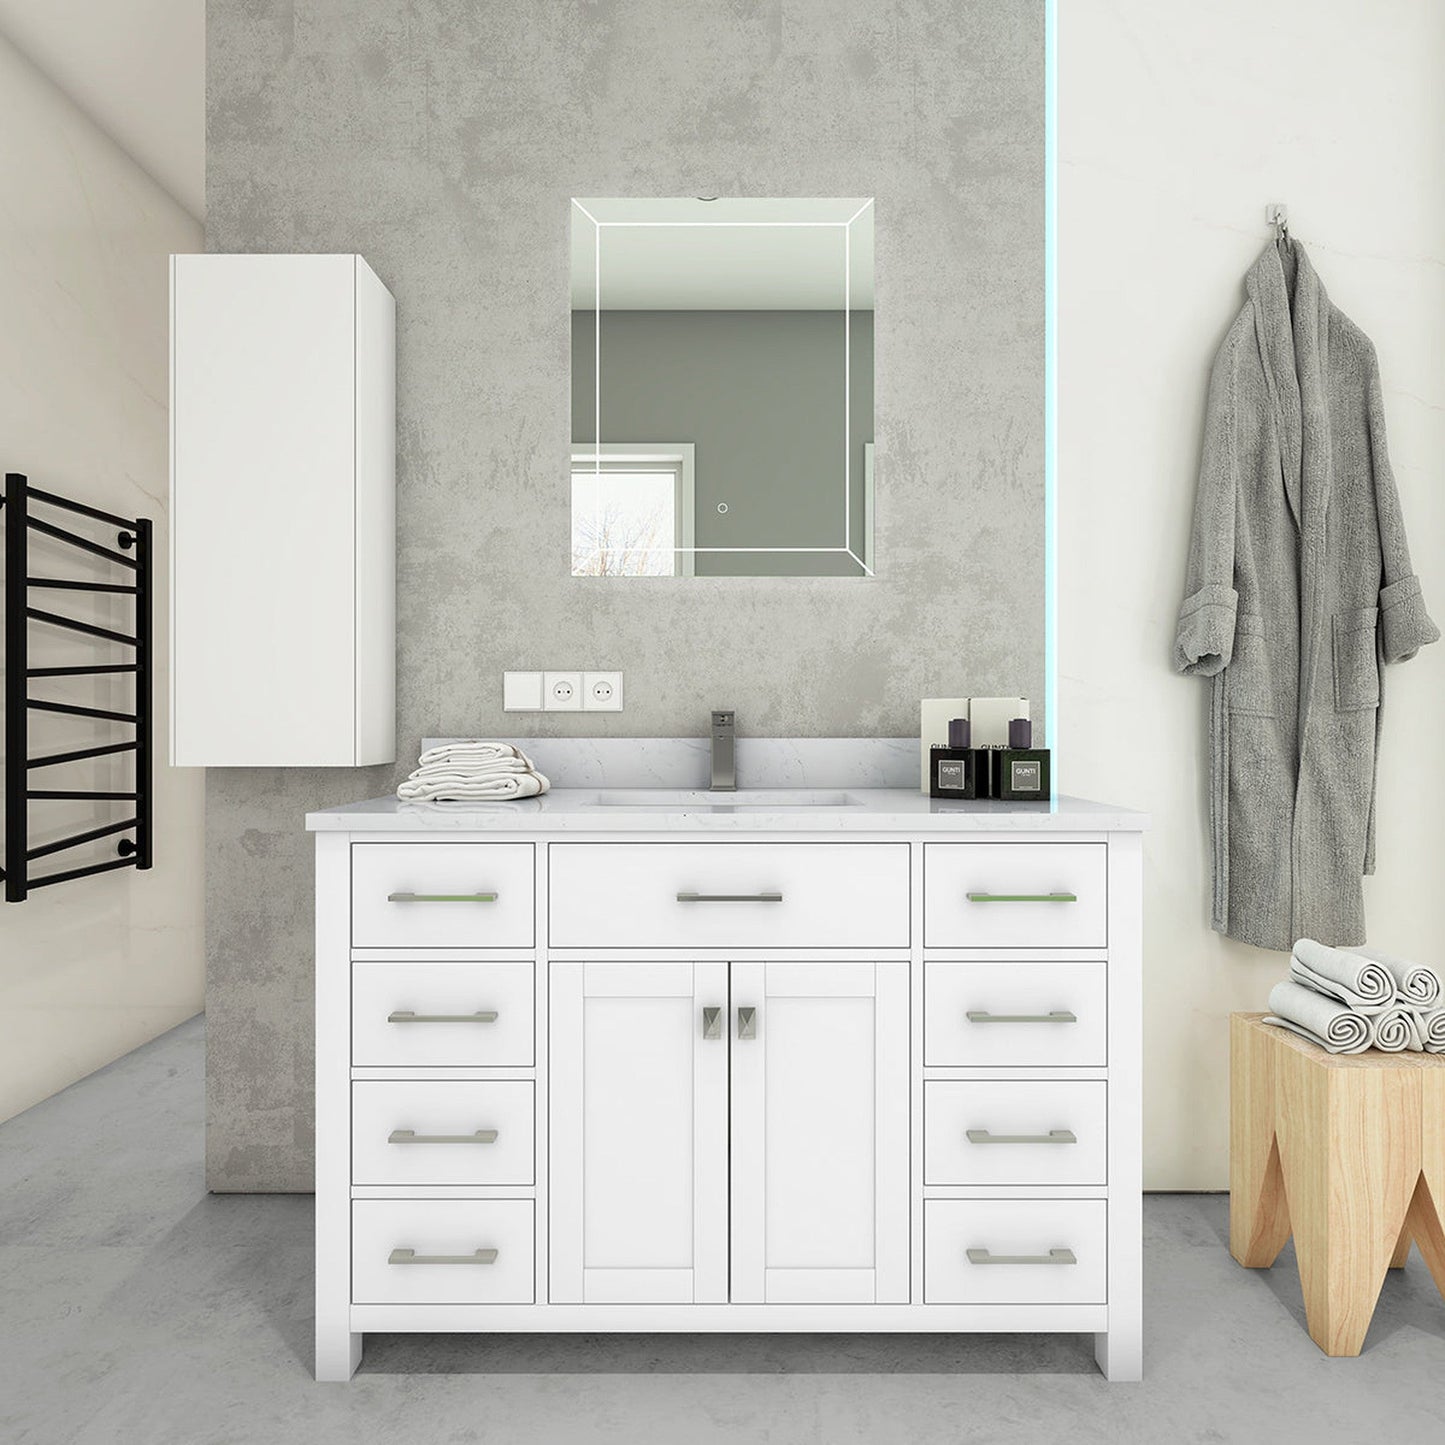 Duko Roma 48" With White Cararra Marble Tabletop, Rectangular Single Basin and Drawer Cabinet White Wooden Vanity Set